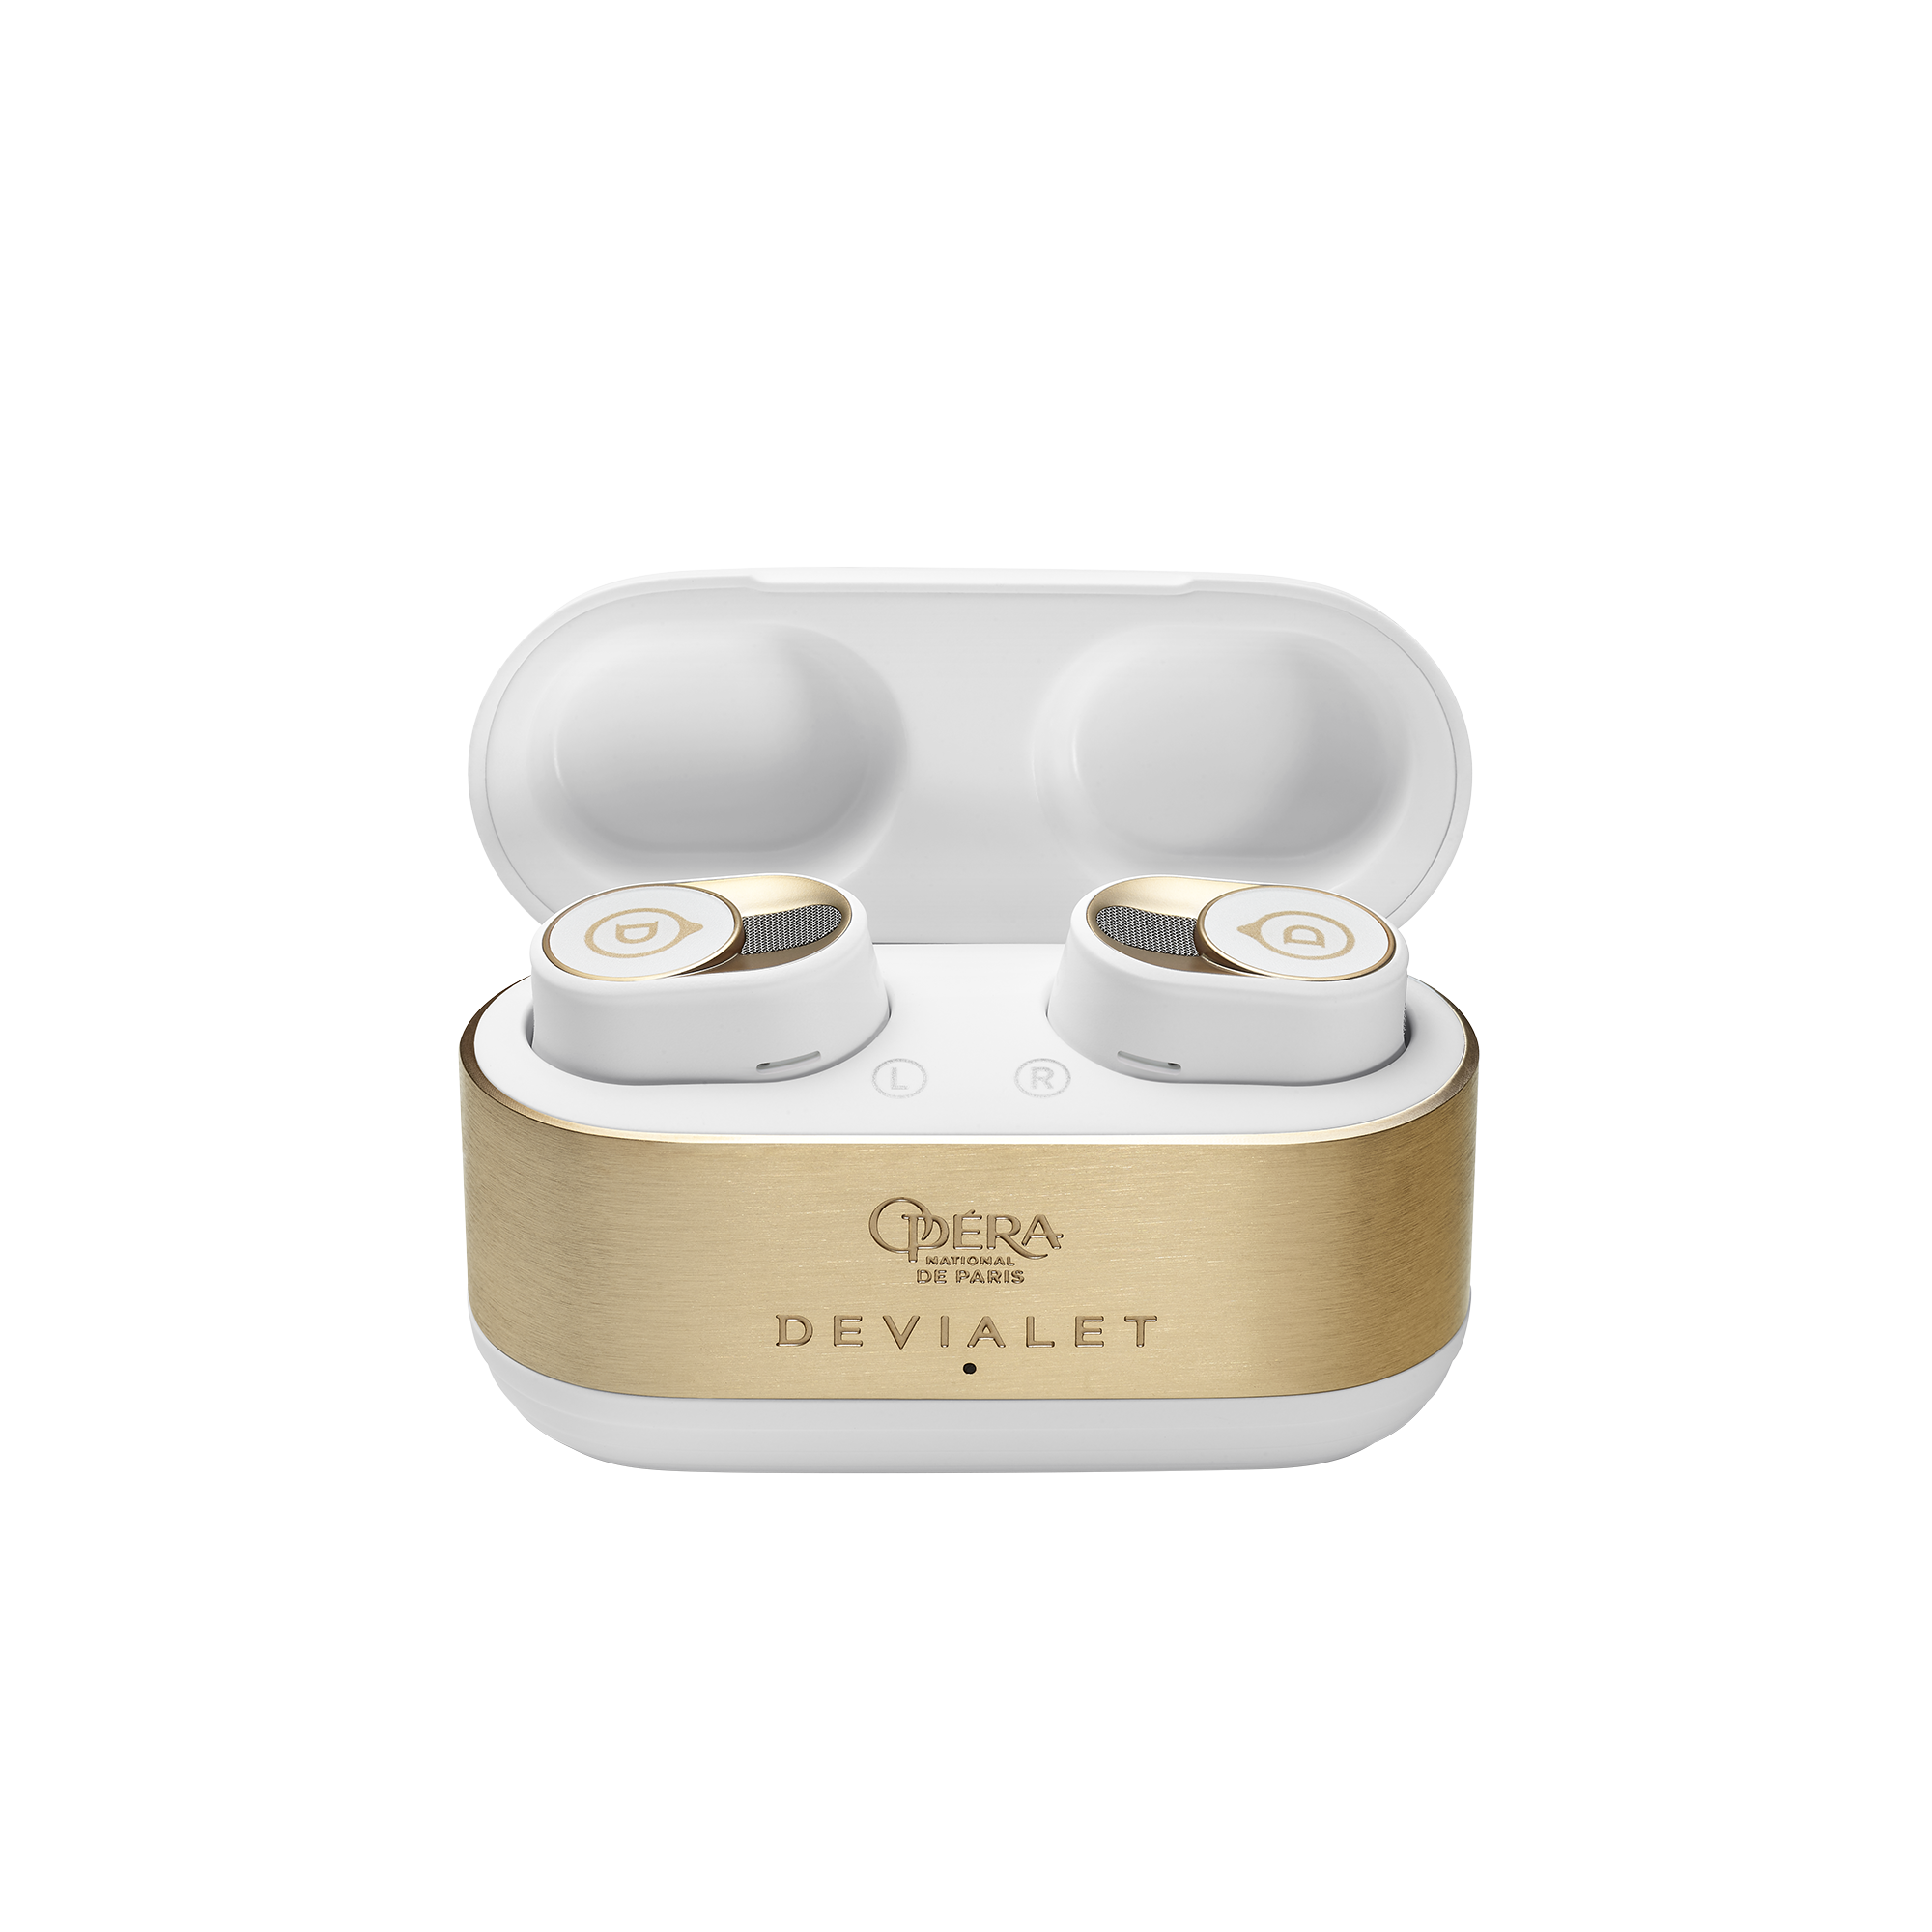 Devialet's Gemini II are the most luxurious wireless earbuds you